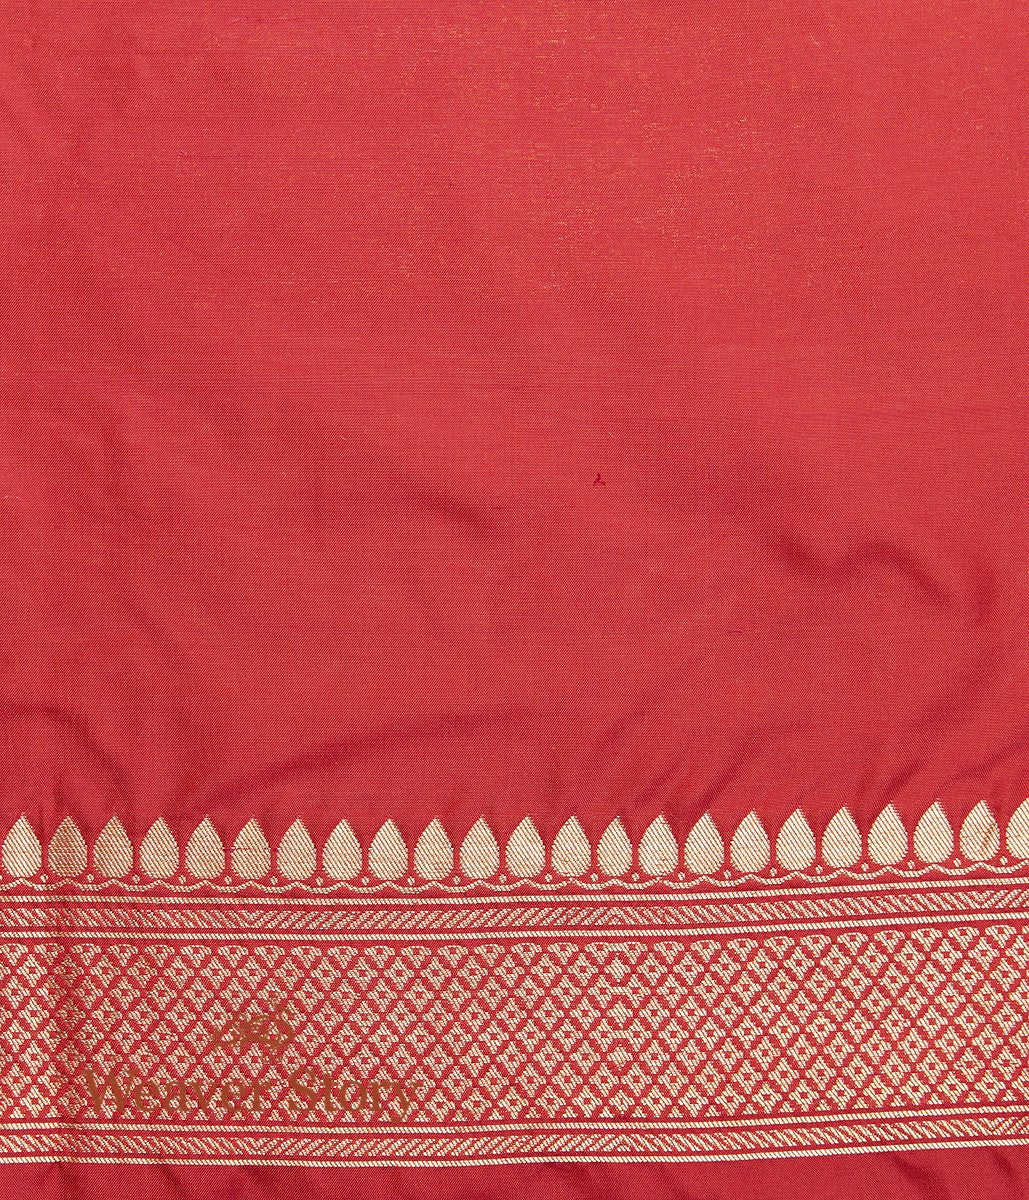 Handloom_OffWhite_and_Gold_Kimkhab_Saree_with_Red_Border_and_Pallu_WeaverStory_05